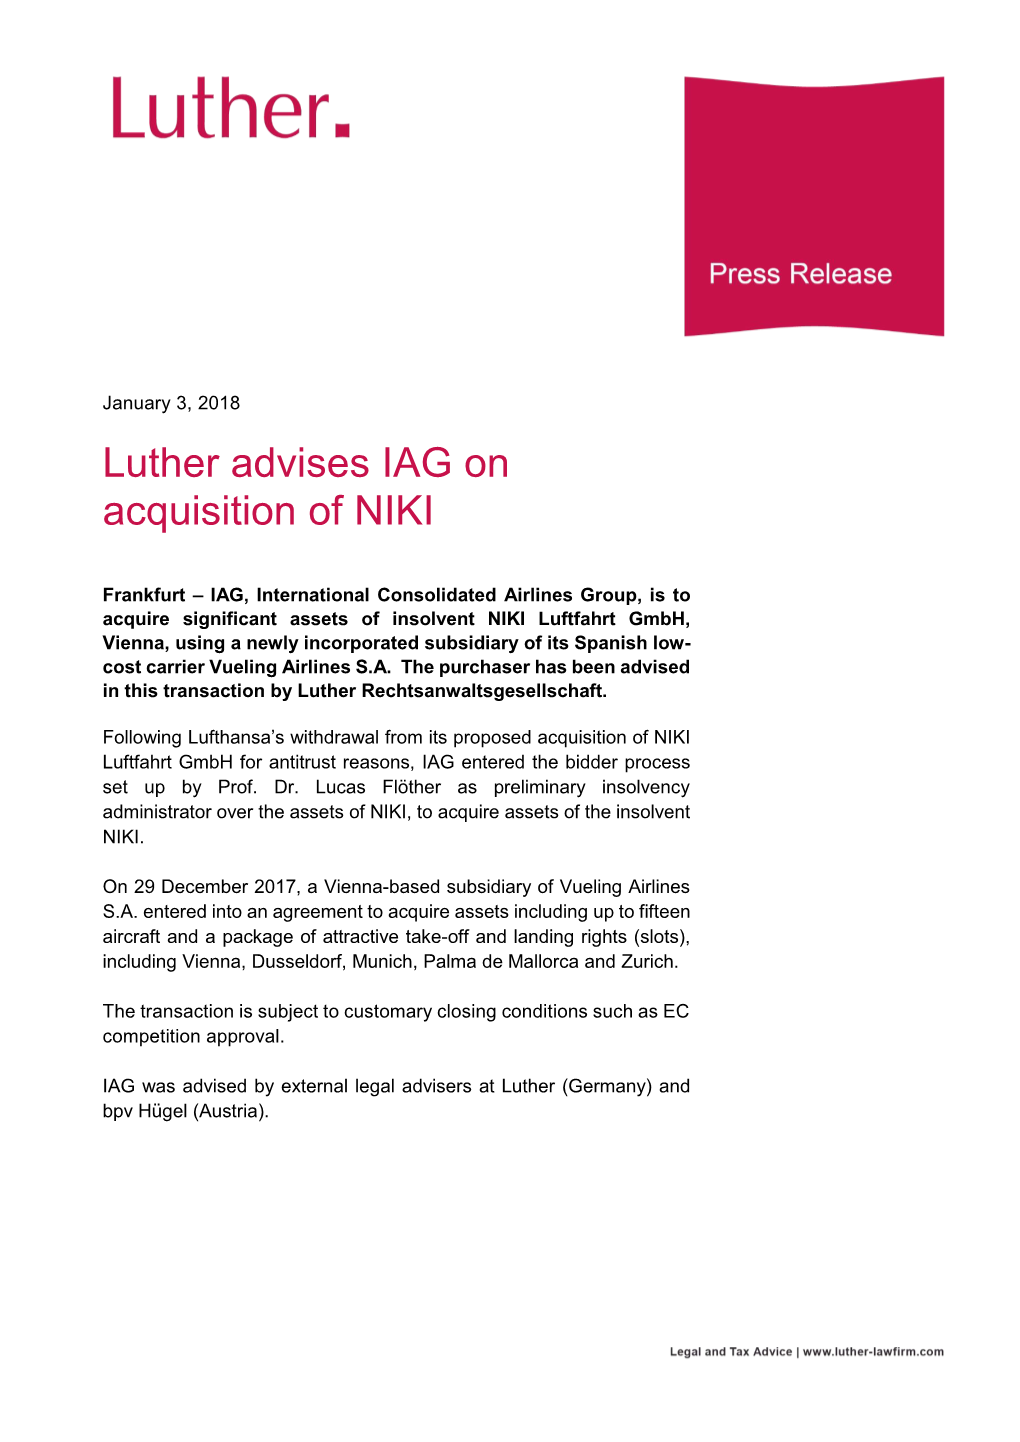 Luther Advises IAG on Acquisition of NIKI